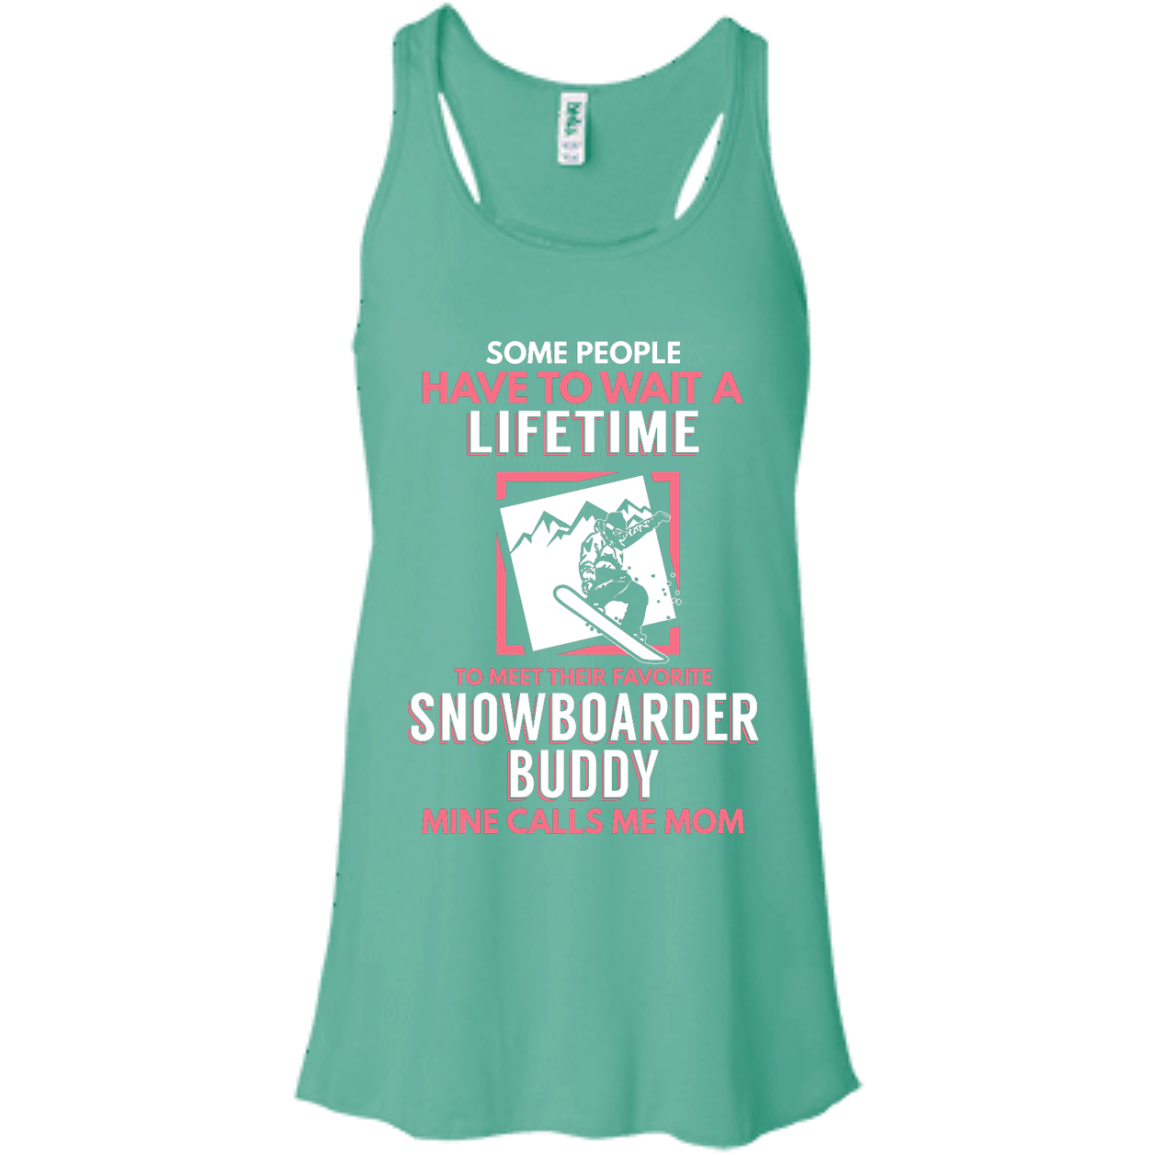 Some People Have To Wait A Lifetime To Meet Their Favorite Snowboarder Buddy Mine Calls Me Mom Tank Tops - Powderaddicts